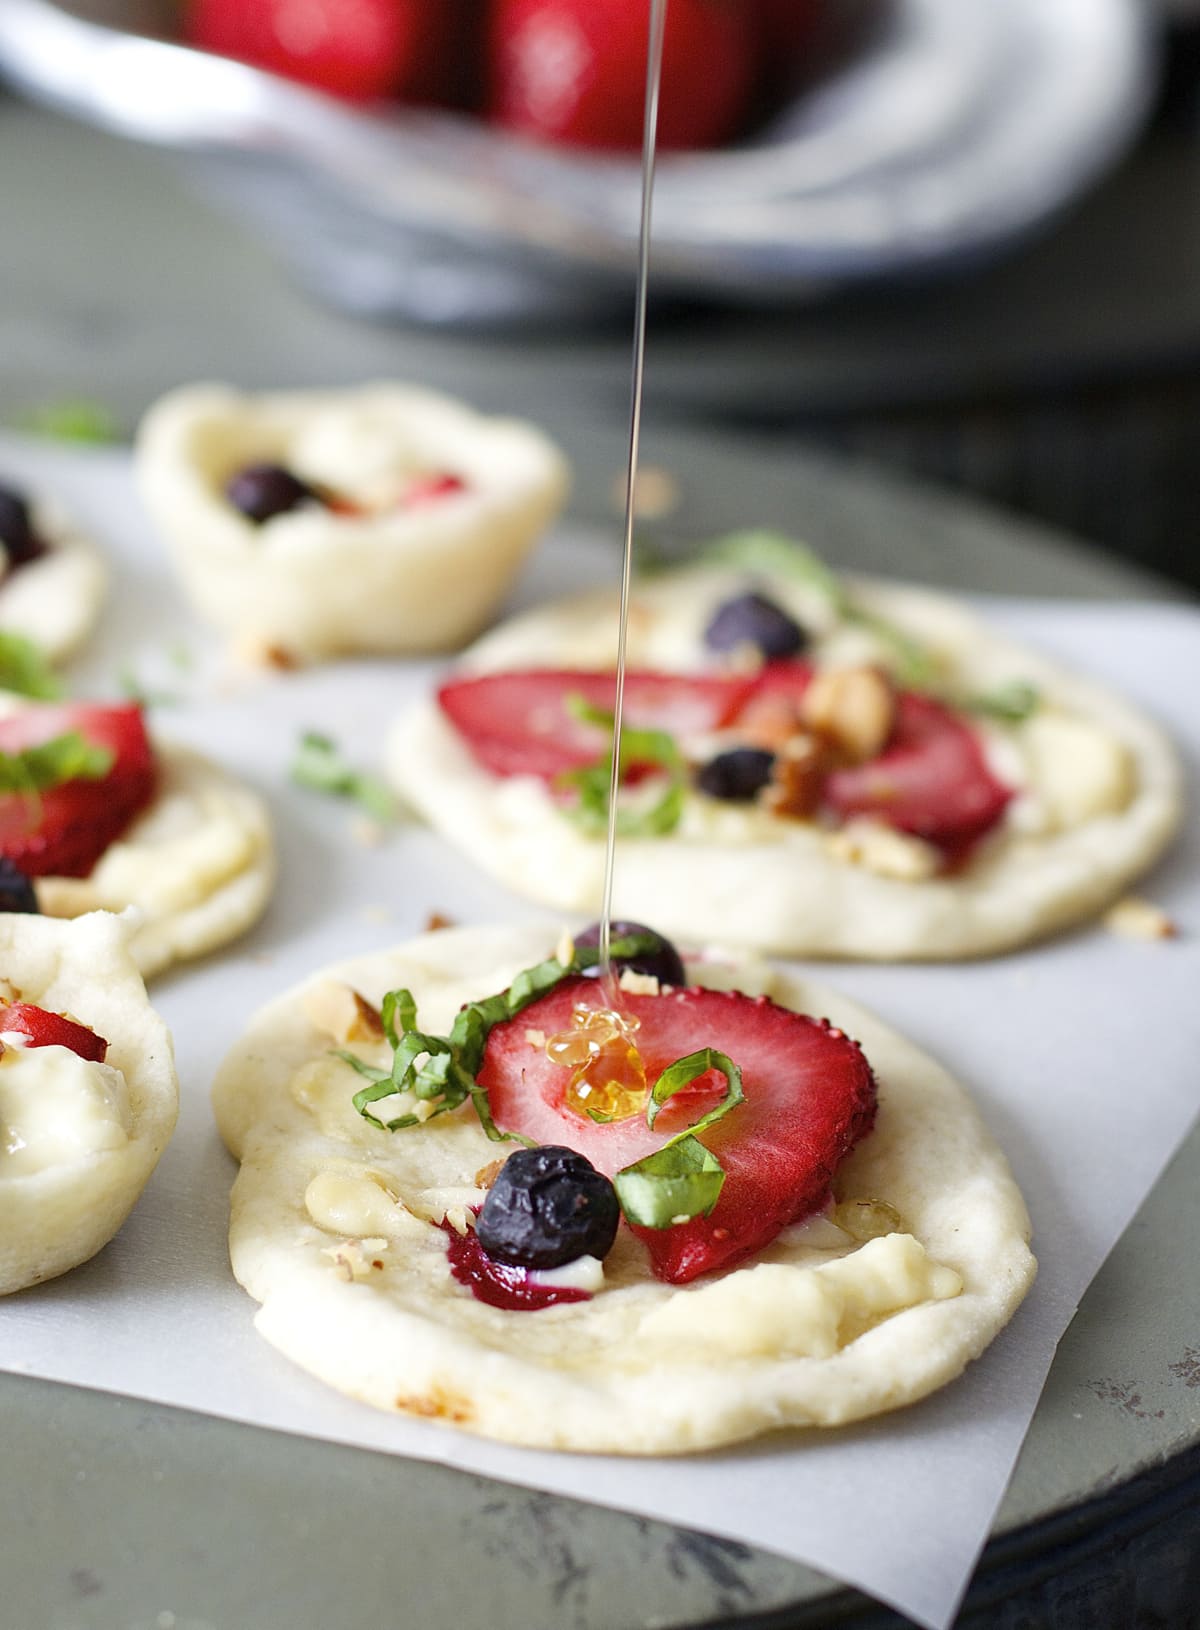 These light Strawberry and Honey Goat Cheese Bites are a simple yet elegant appetizer for Spring brunch!